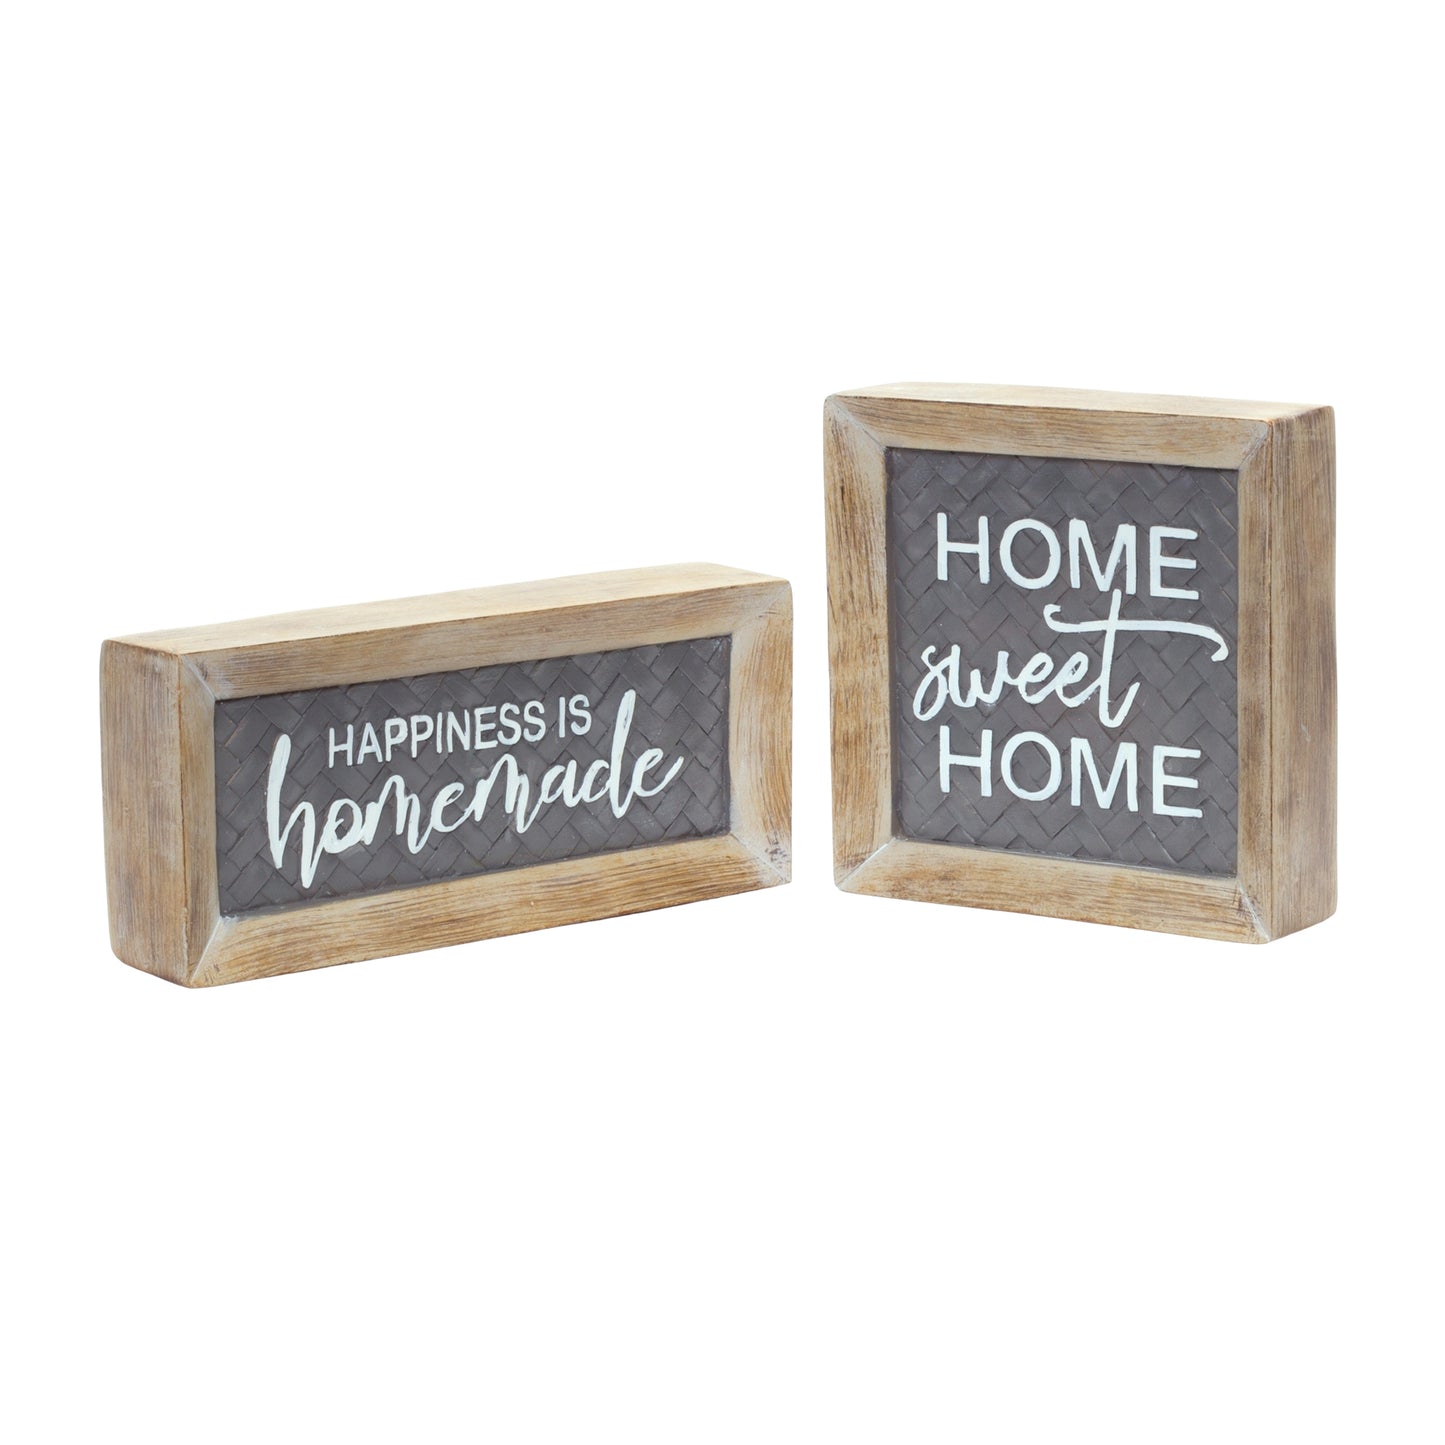 Home Sentiment Block Sign with Wood Grain Design (Set of 2)